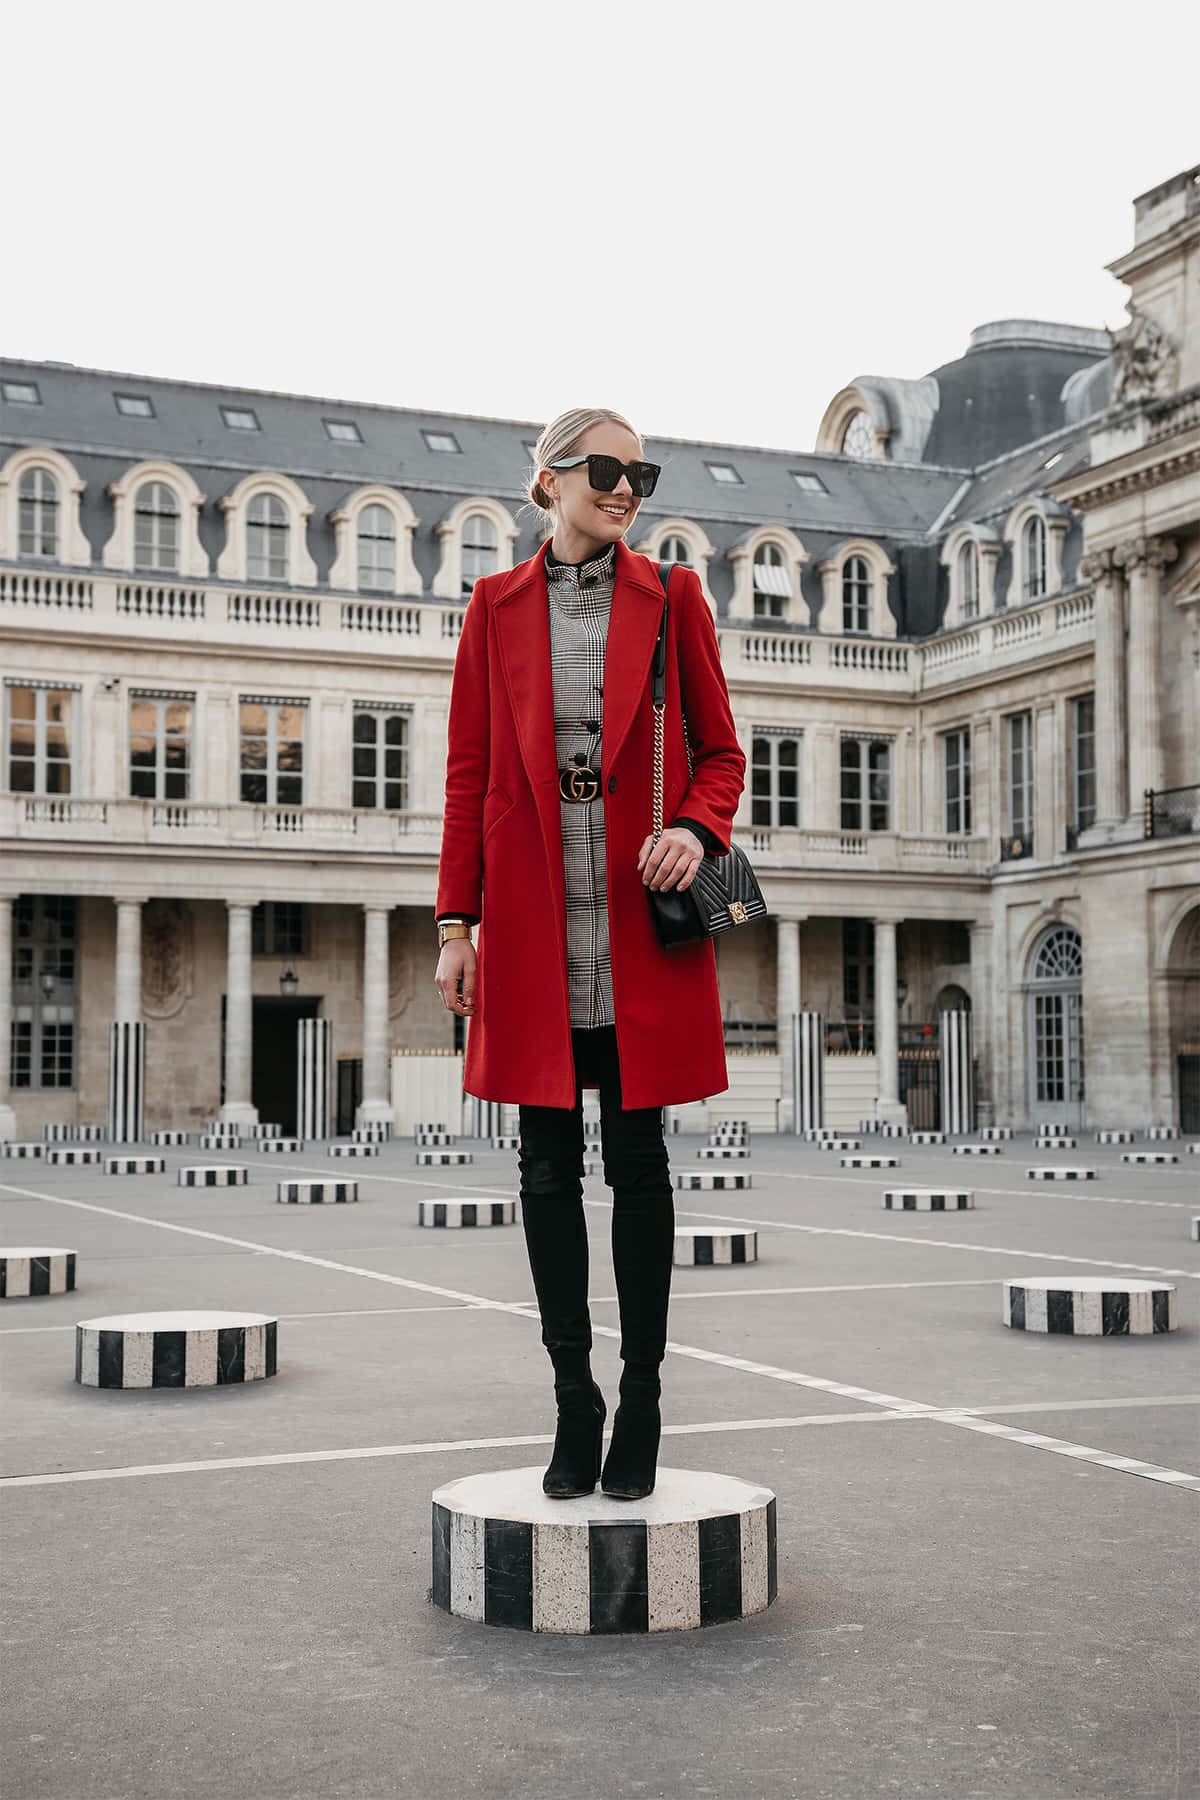 Fashionable woman in a red coat at the park Wallpaper